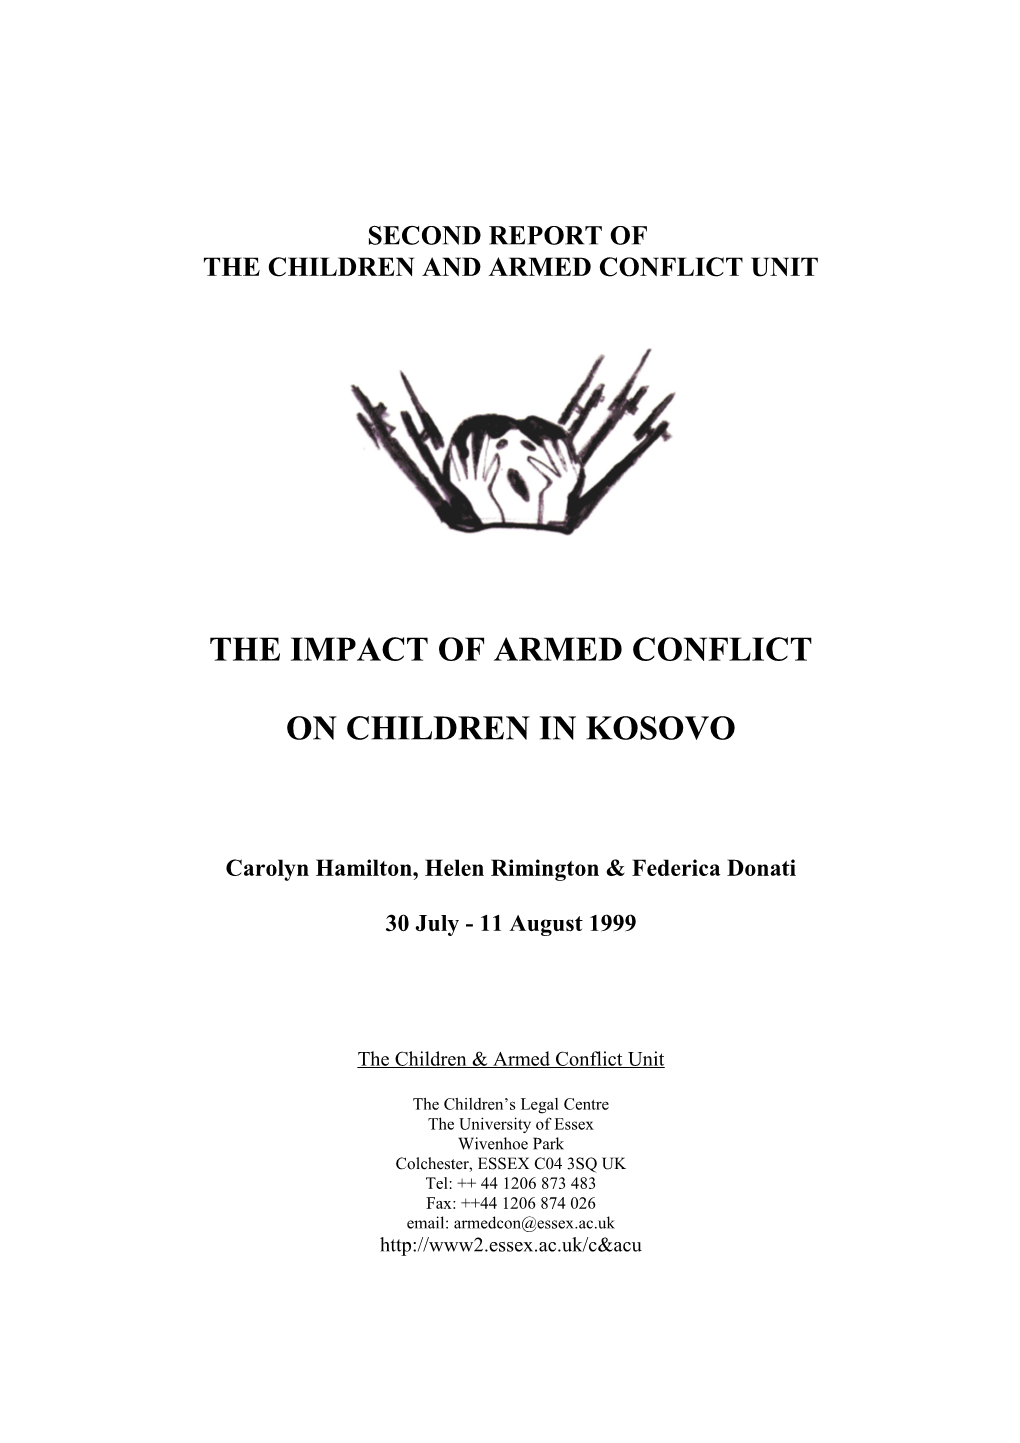 Second Report on Kosovo (CACU, August 1999)